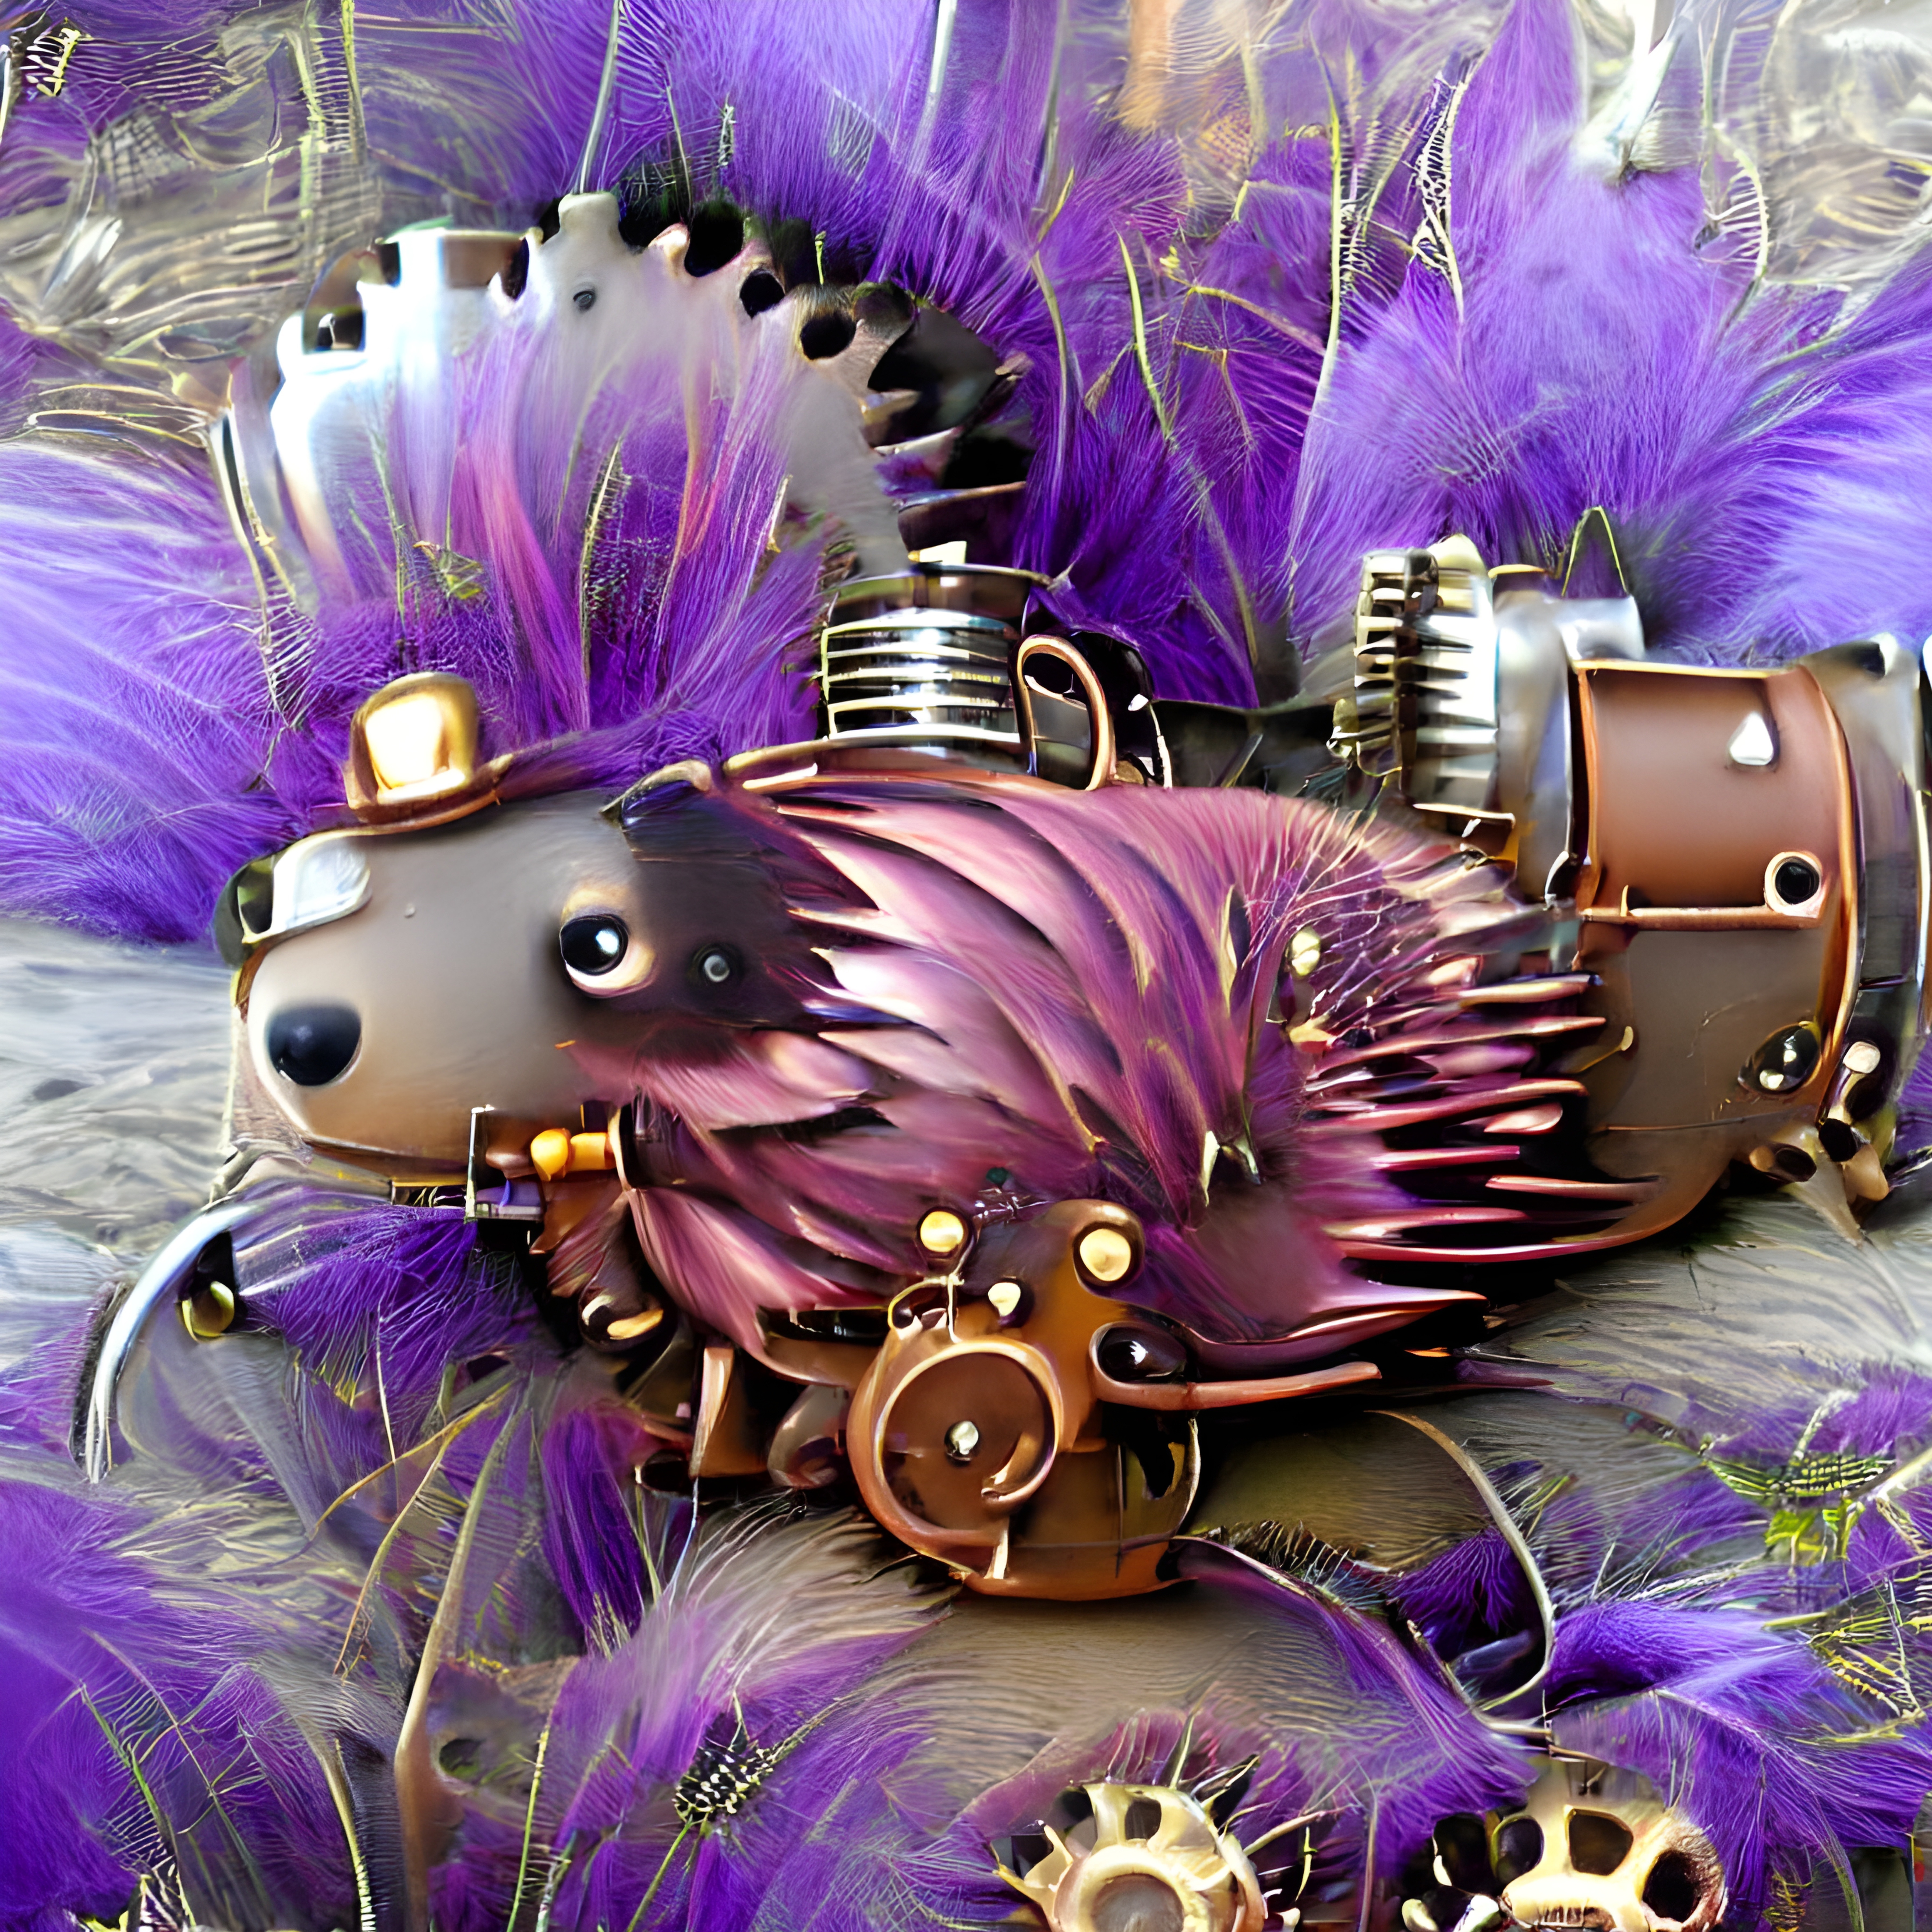 The Humble Porcupine